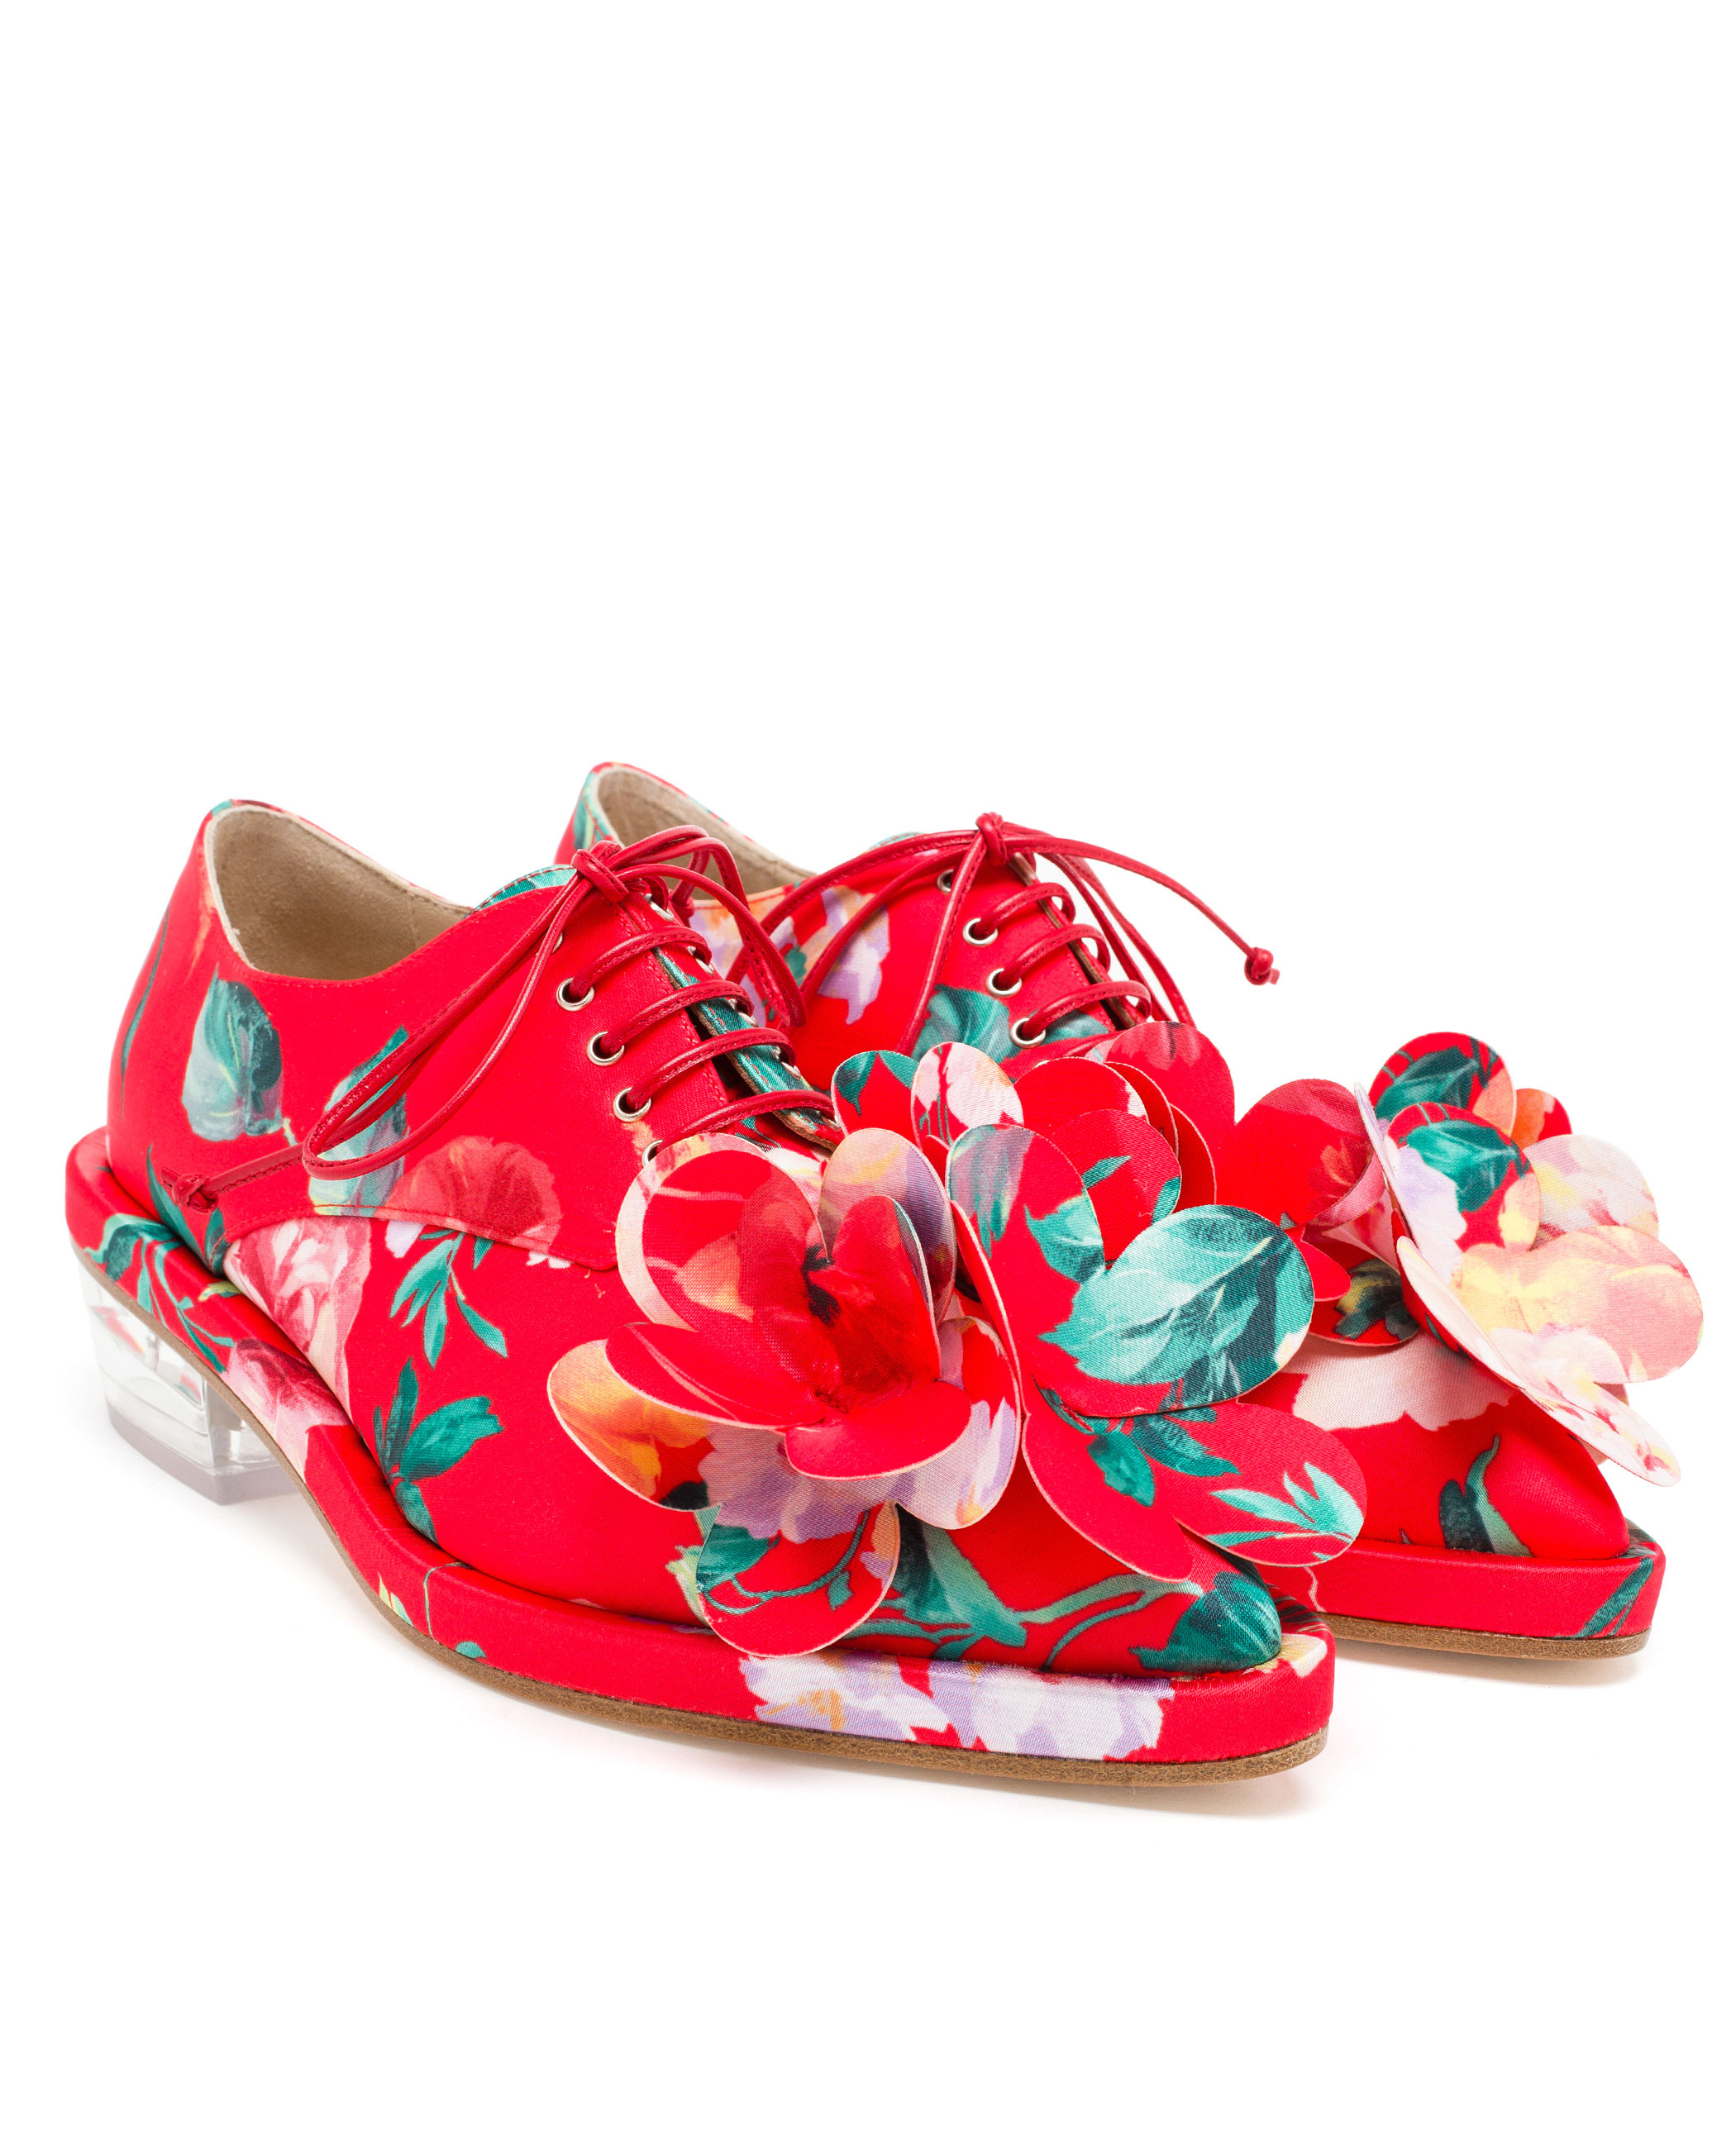 Lyst - Simone rocha Satin Brogues With Floral Appliqué in Red